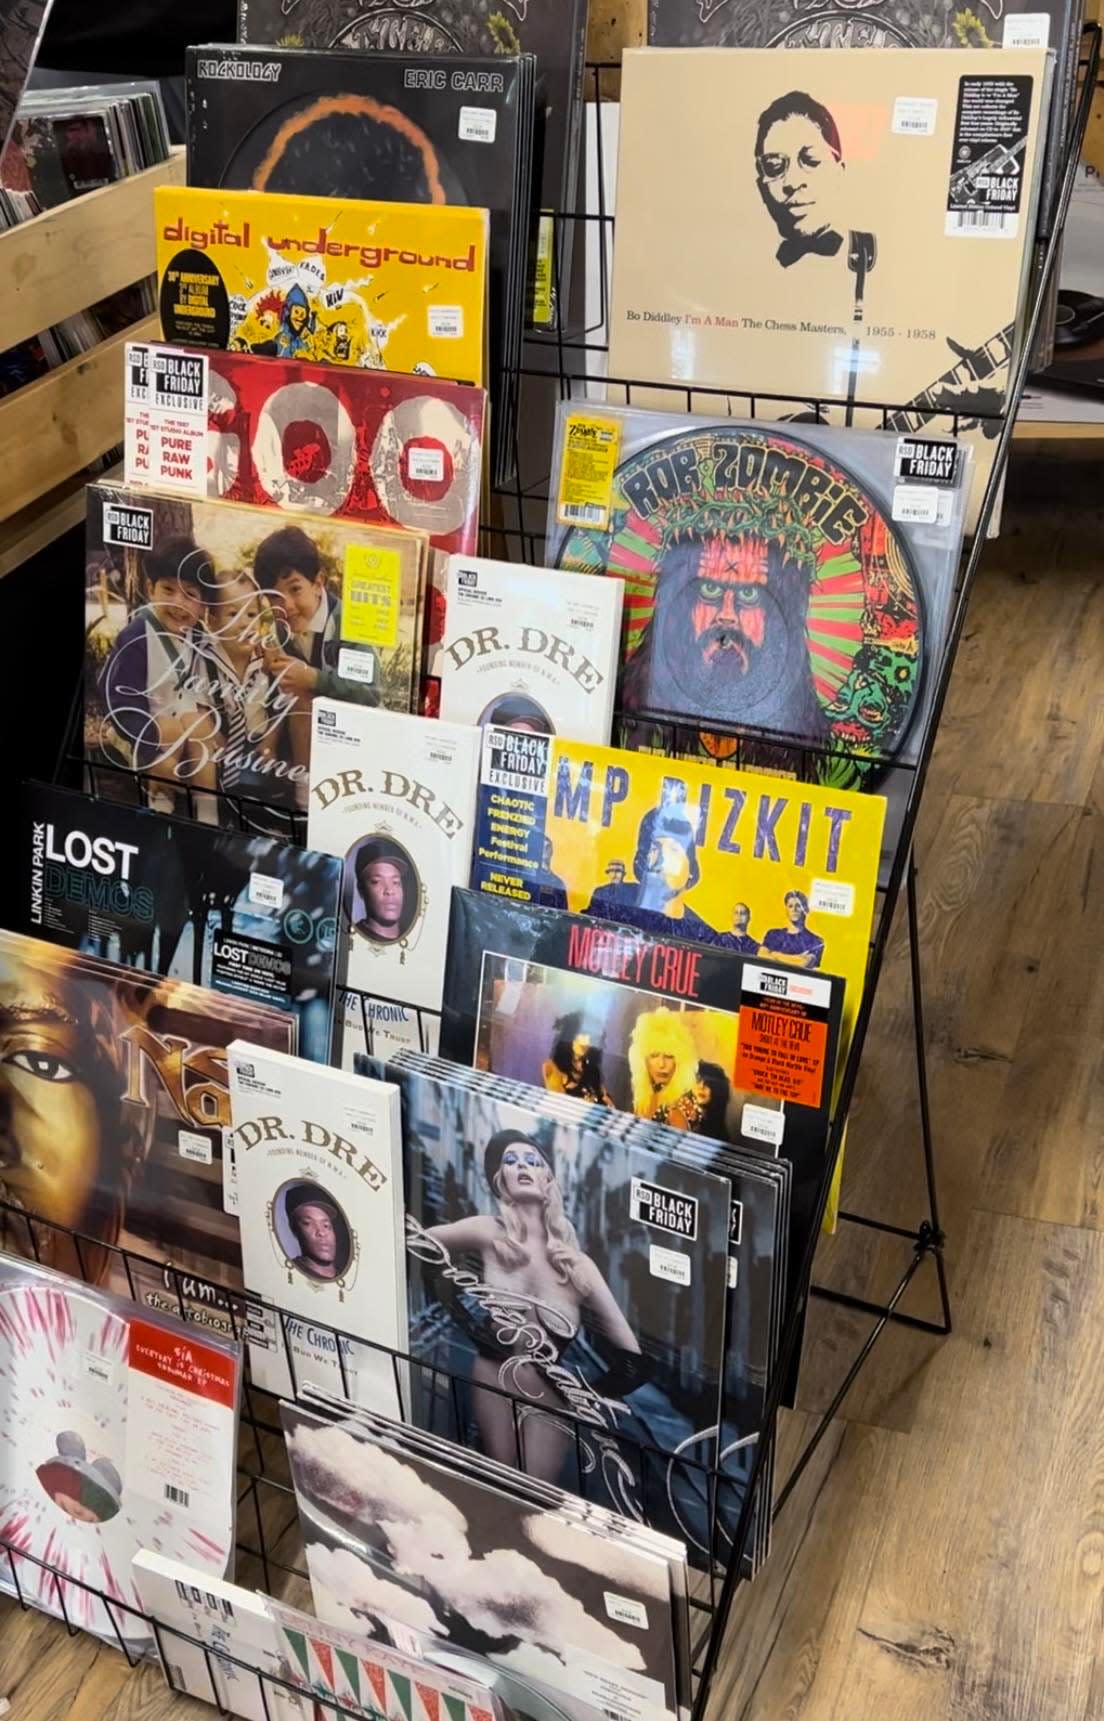 Quonset Hut displays its recent Black Friday Record Store Day releases, which are exclusive to RSD-certified shops and not released digitally.